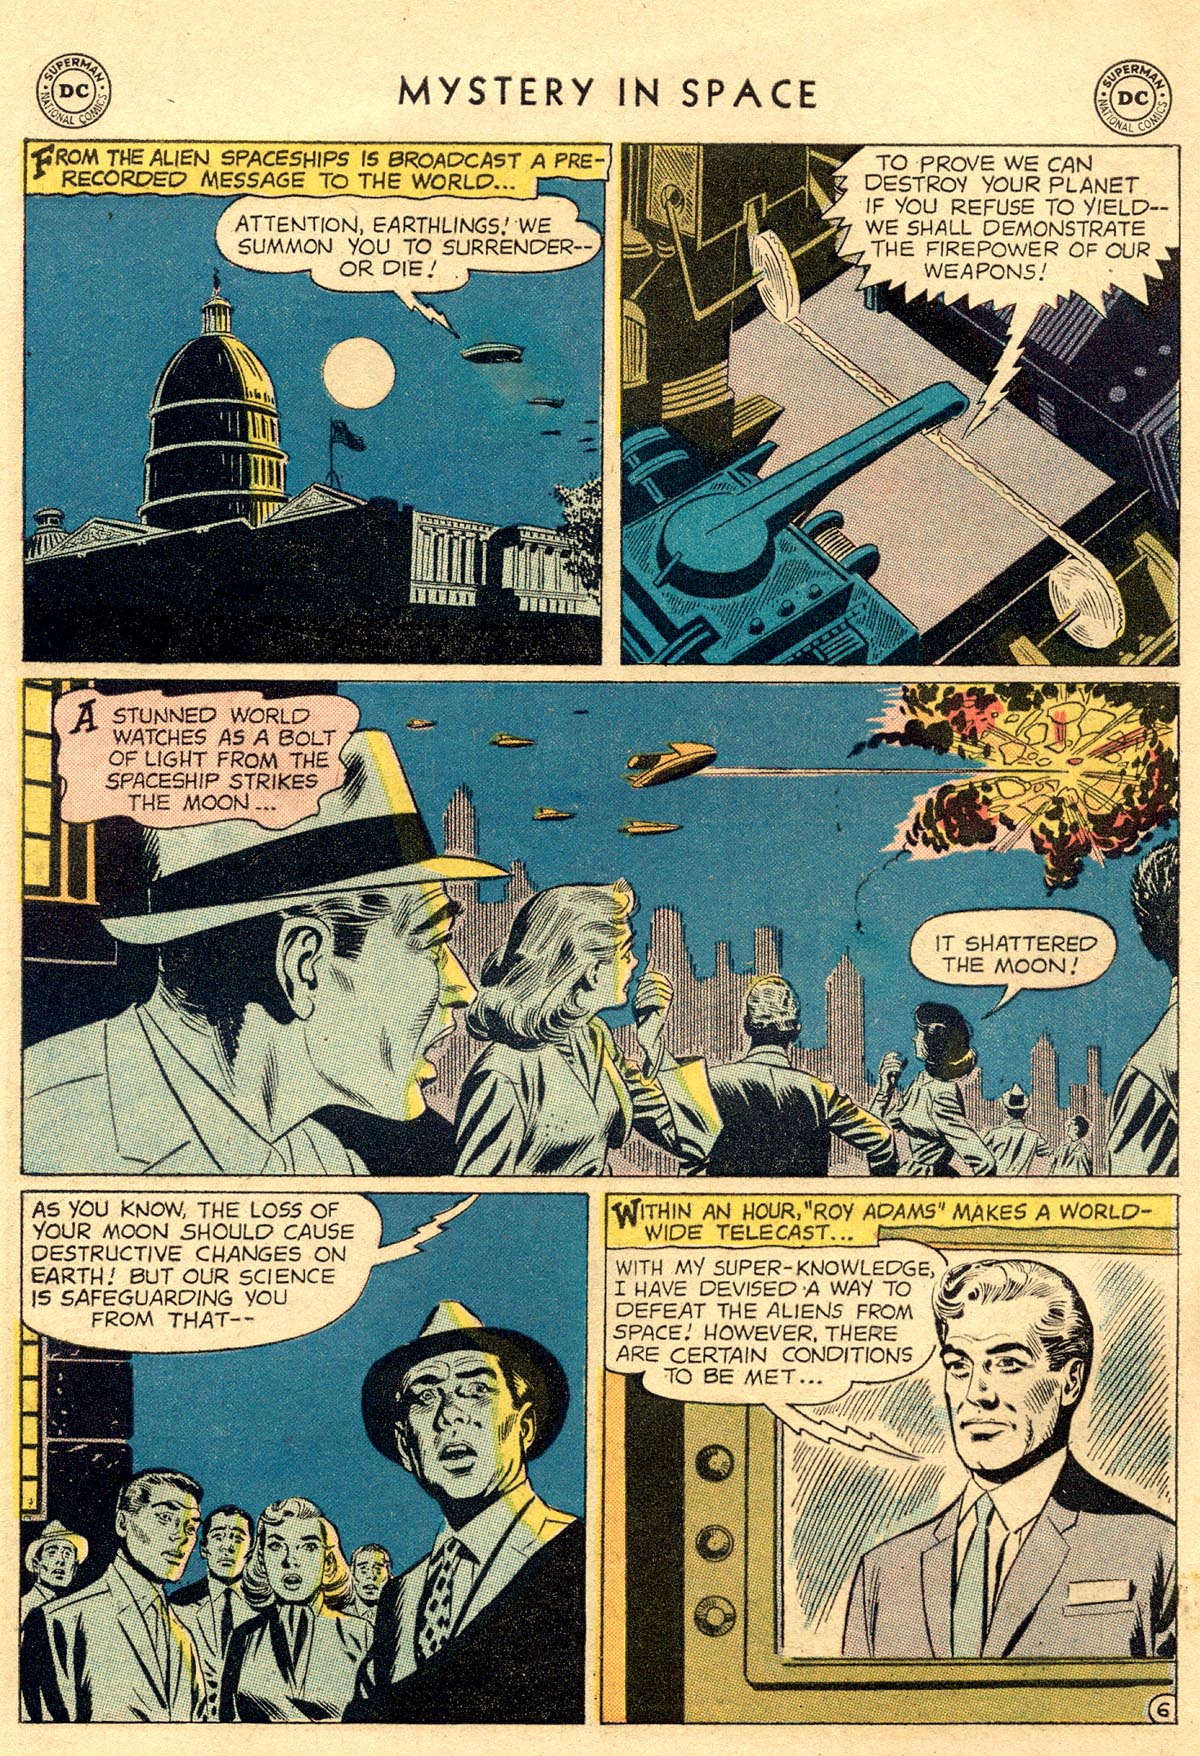 Mystery in Space (1951) 46 Page 7